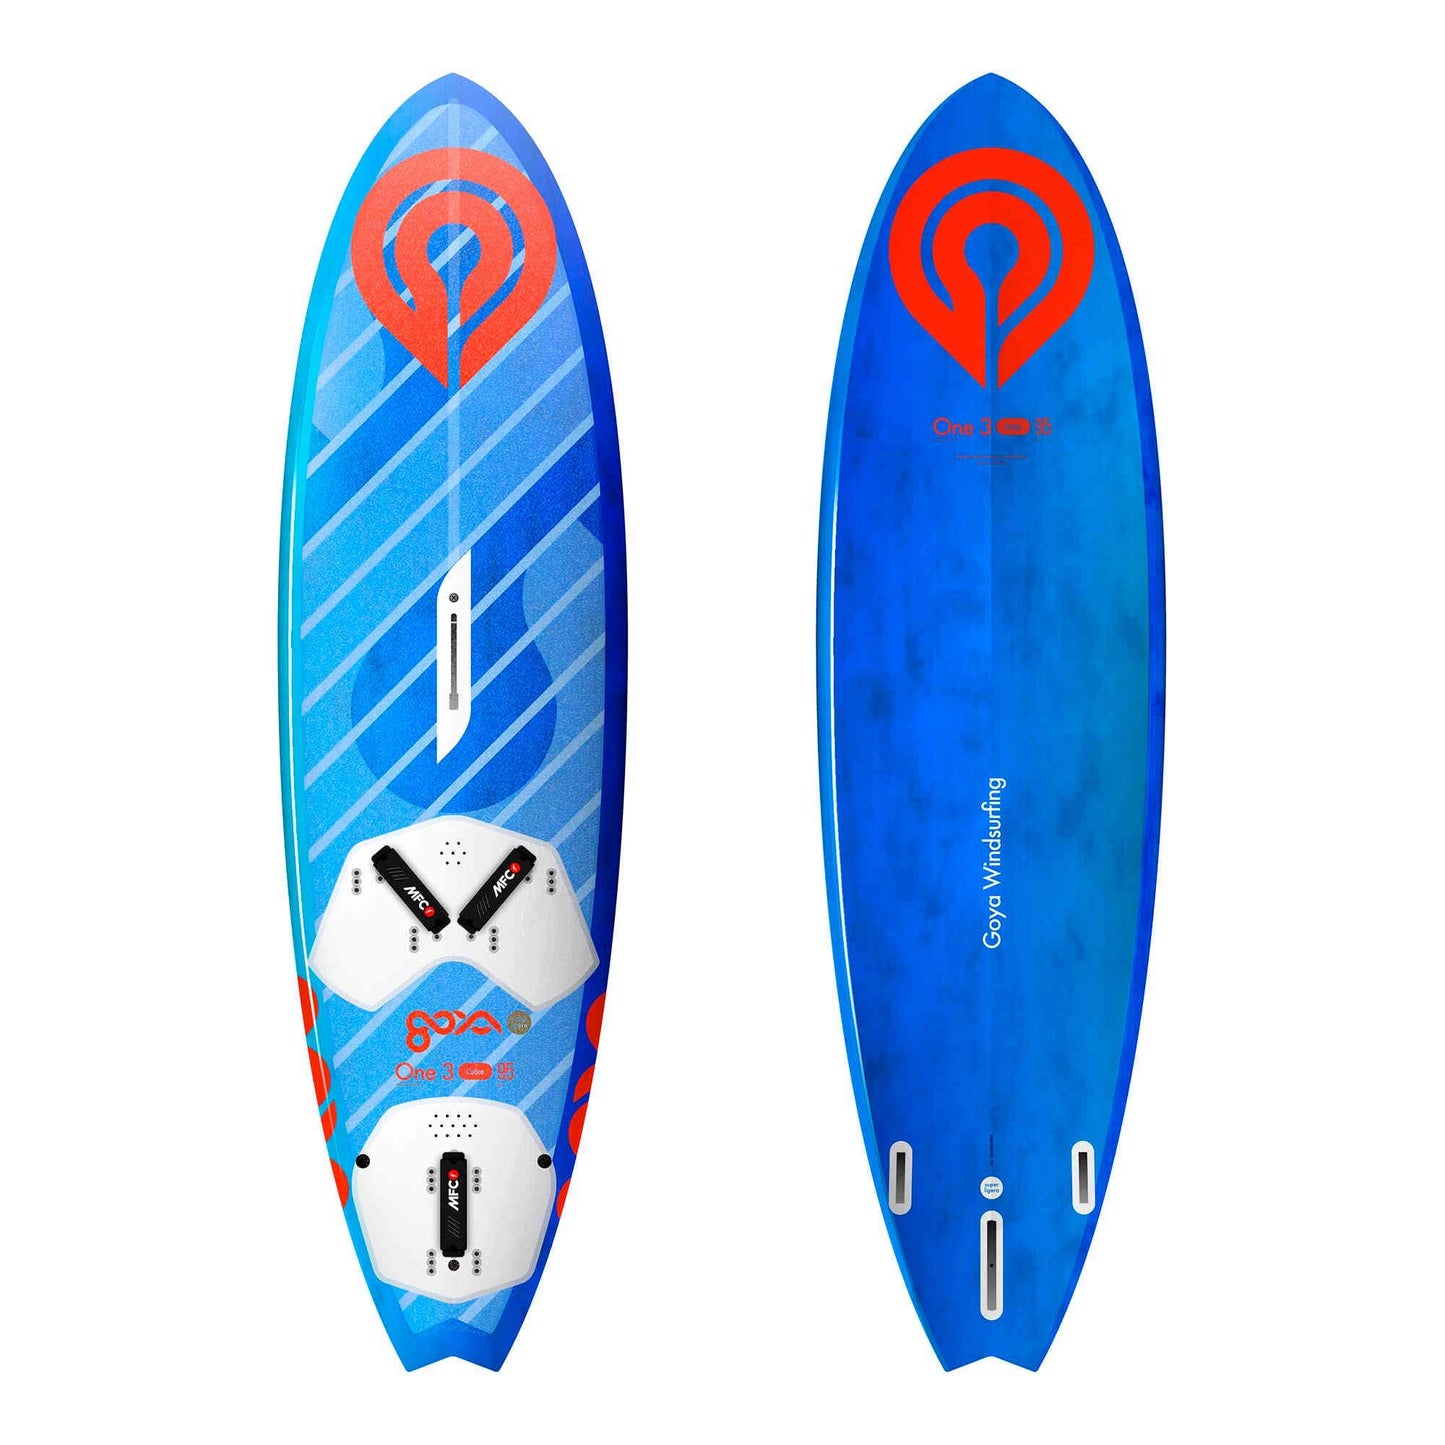 Goya One 3 Carbon Board - Poole Harbour Watersports